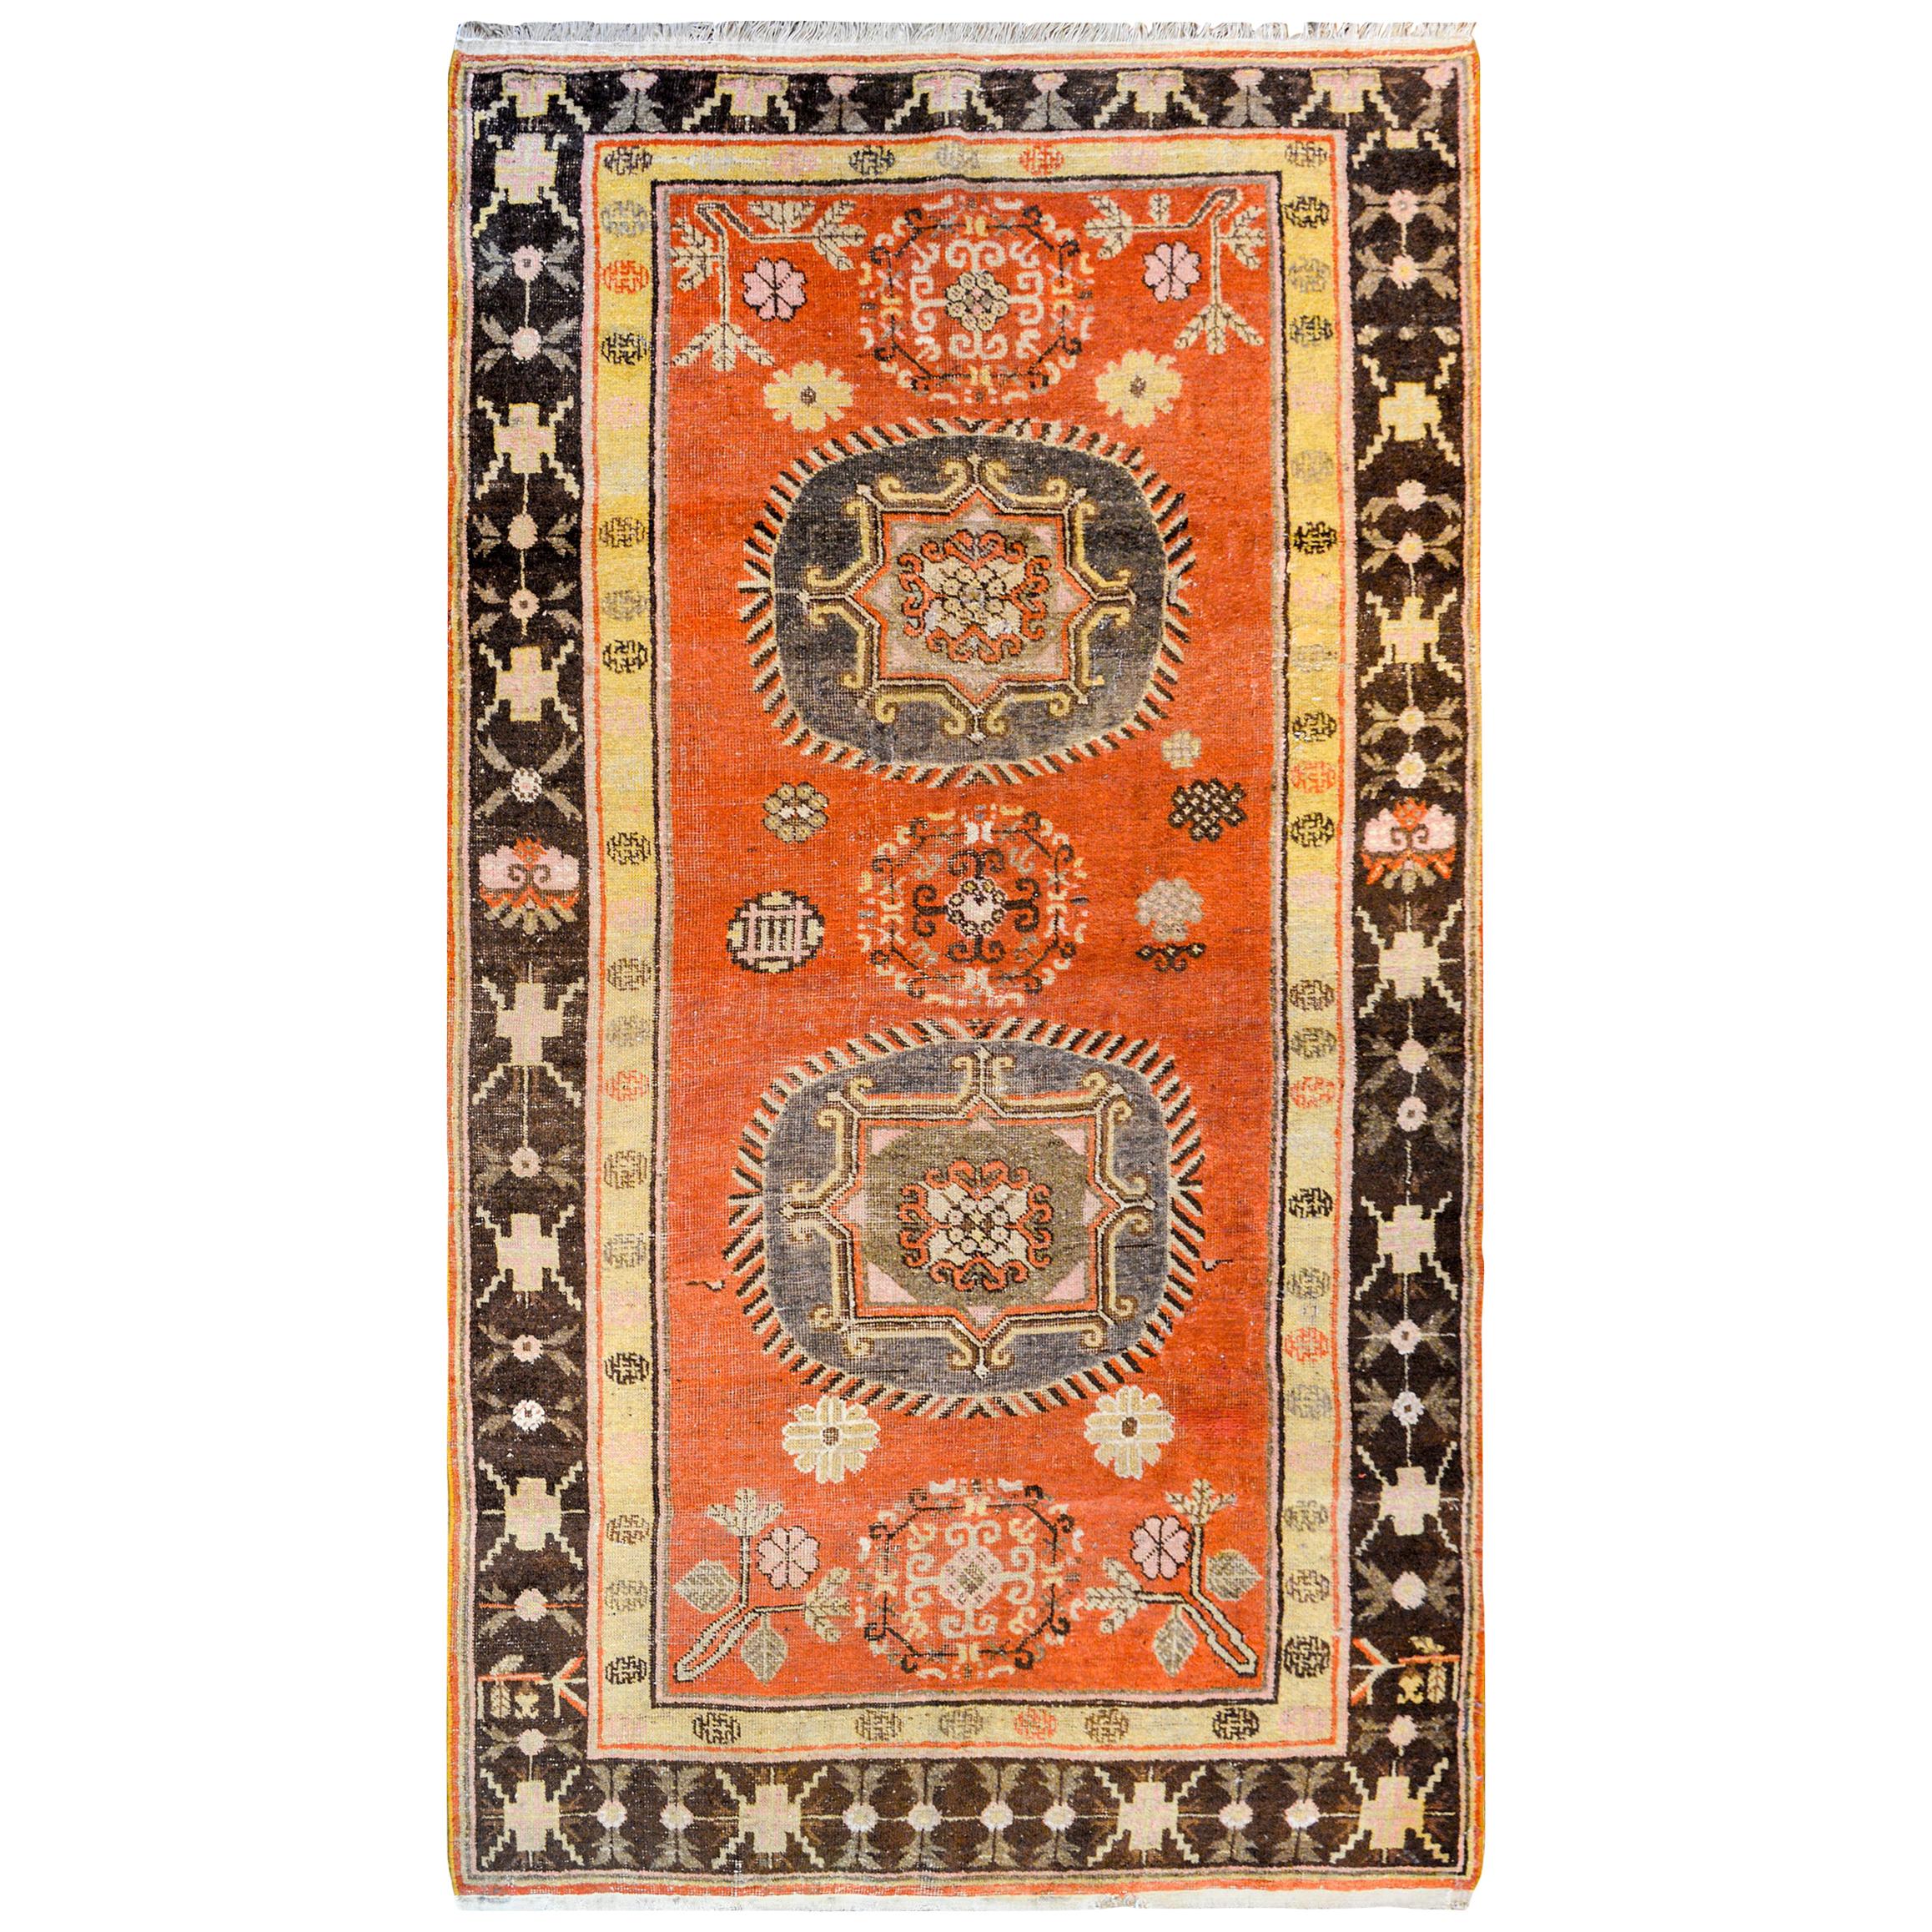 Beautiful Early 20th Century Central Asian Samarghand Rug